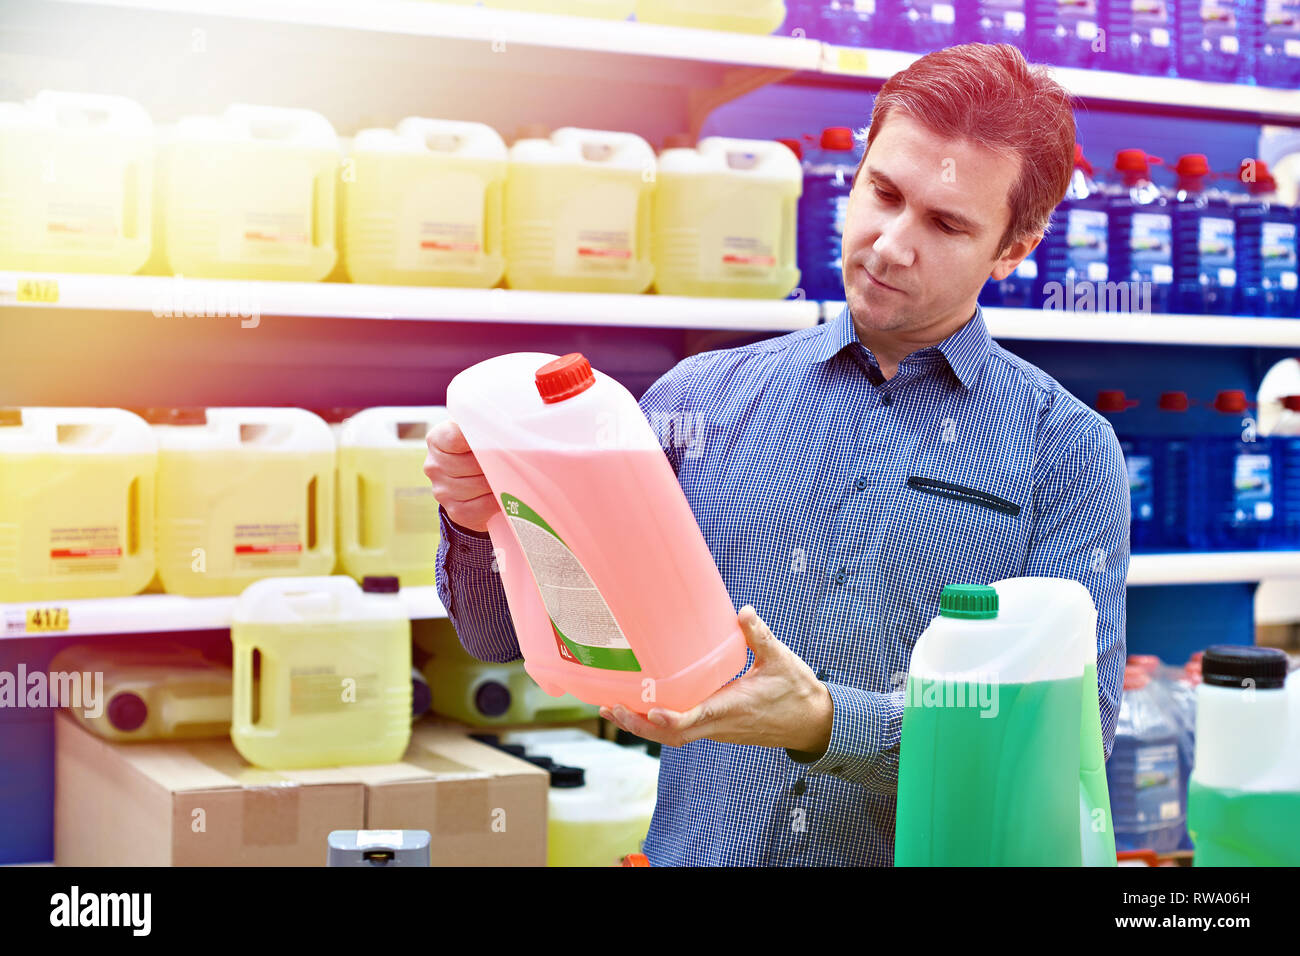 Man buys windshield washer fluid in the supermarket Stock Photo